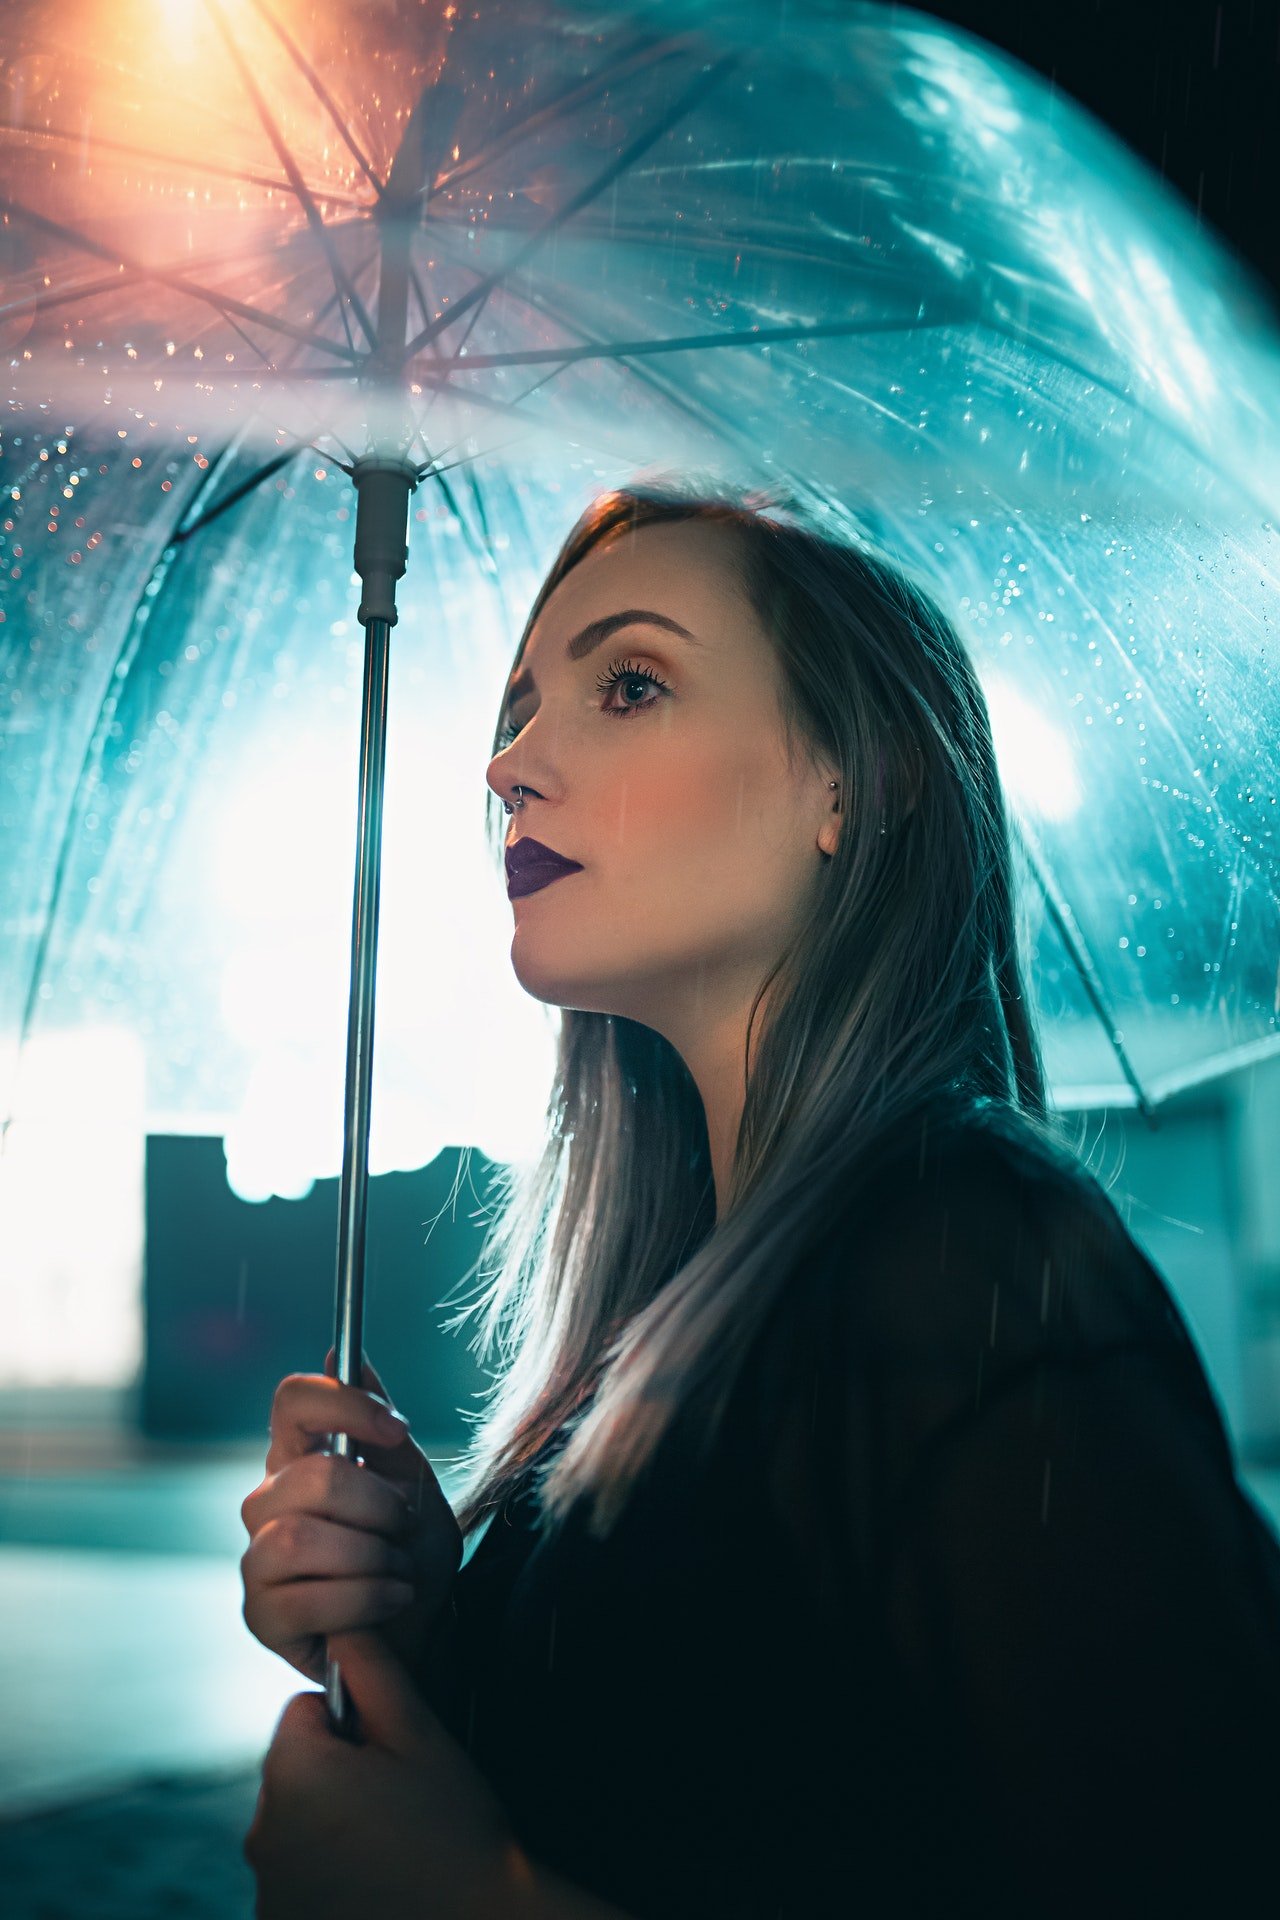 Alice went out with an umbrella to check things out. | Source: Pexels